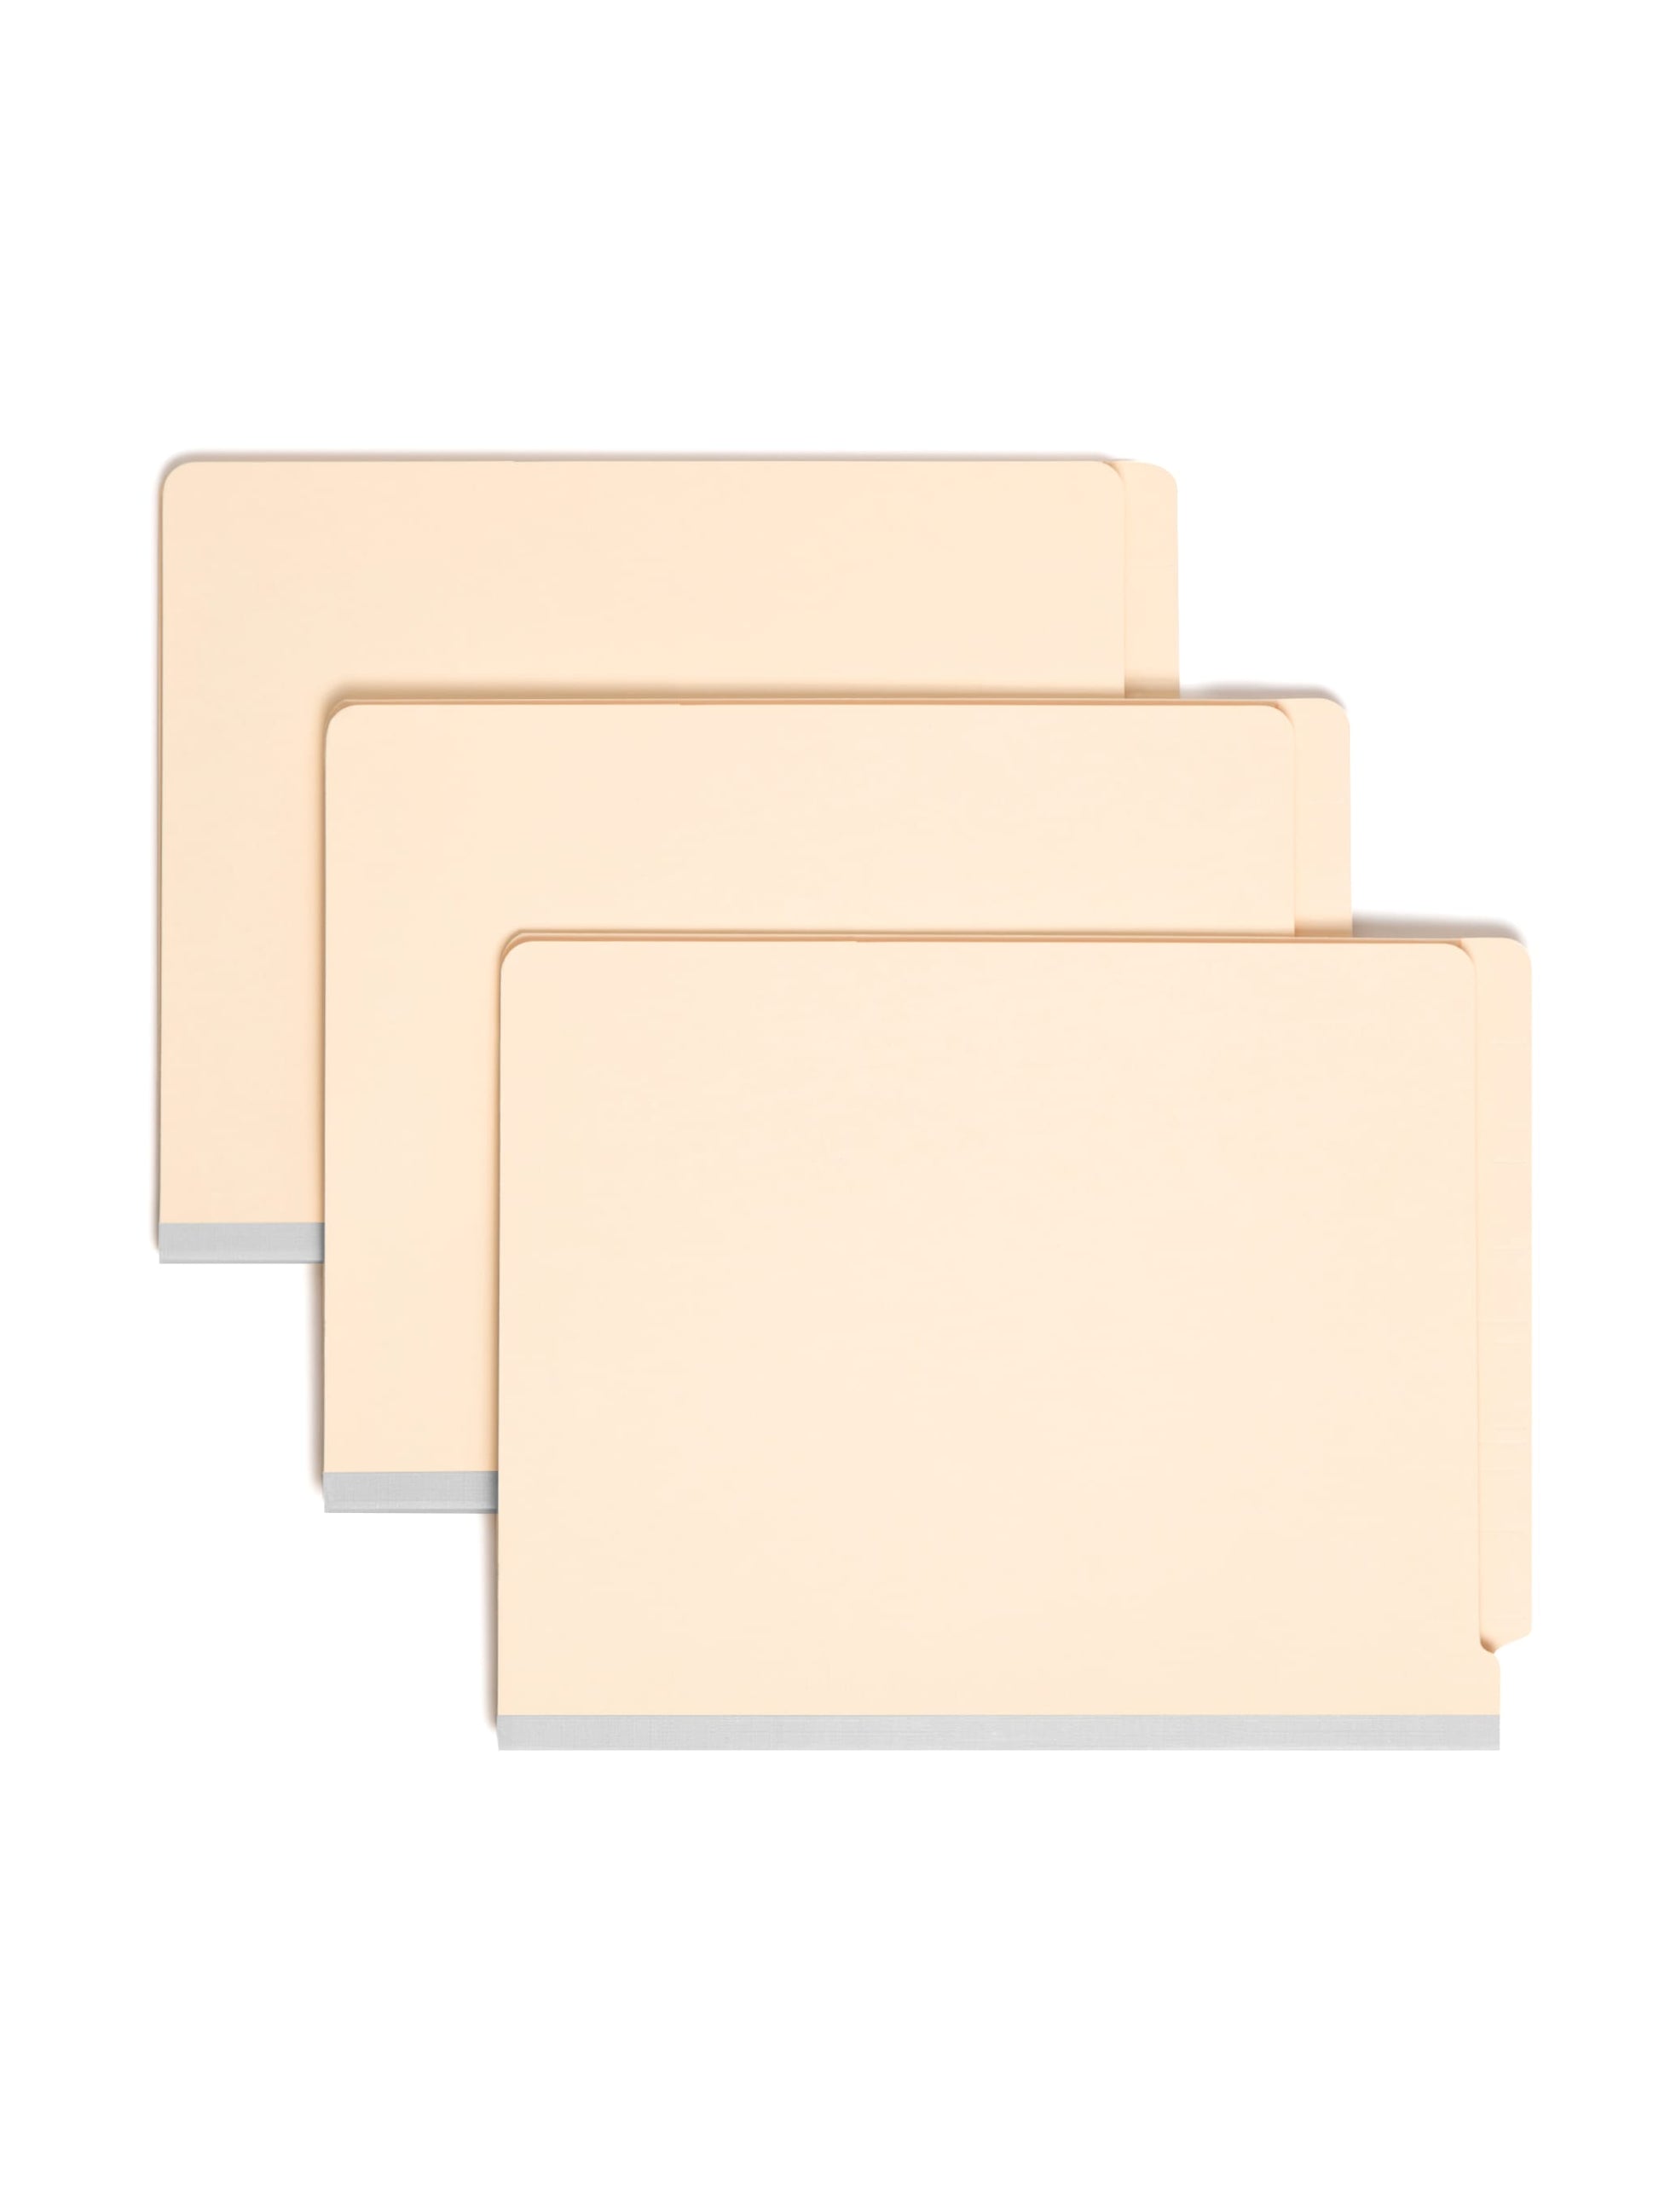 End Tab Manila Classification Folders, Straight-Cut Tab, 2 inch Expansion, 1 Divider, Manila Color, Letter Size, Set of 0, 30086486268258